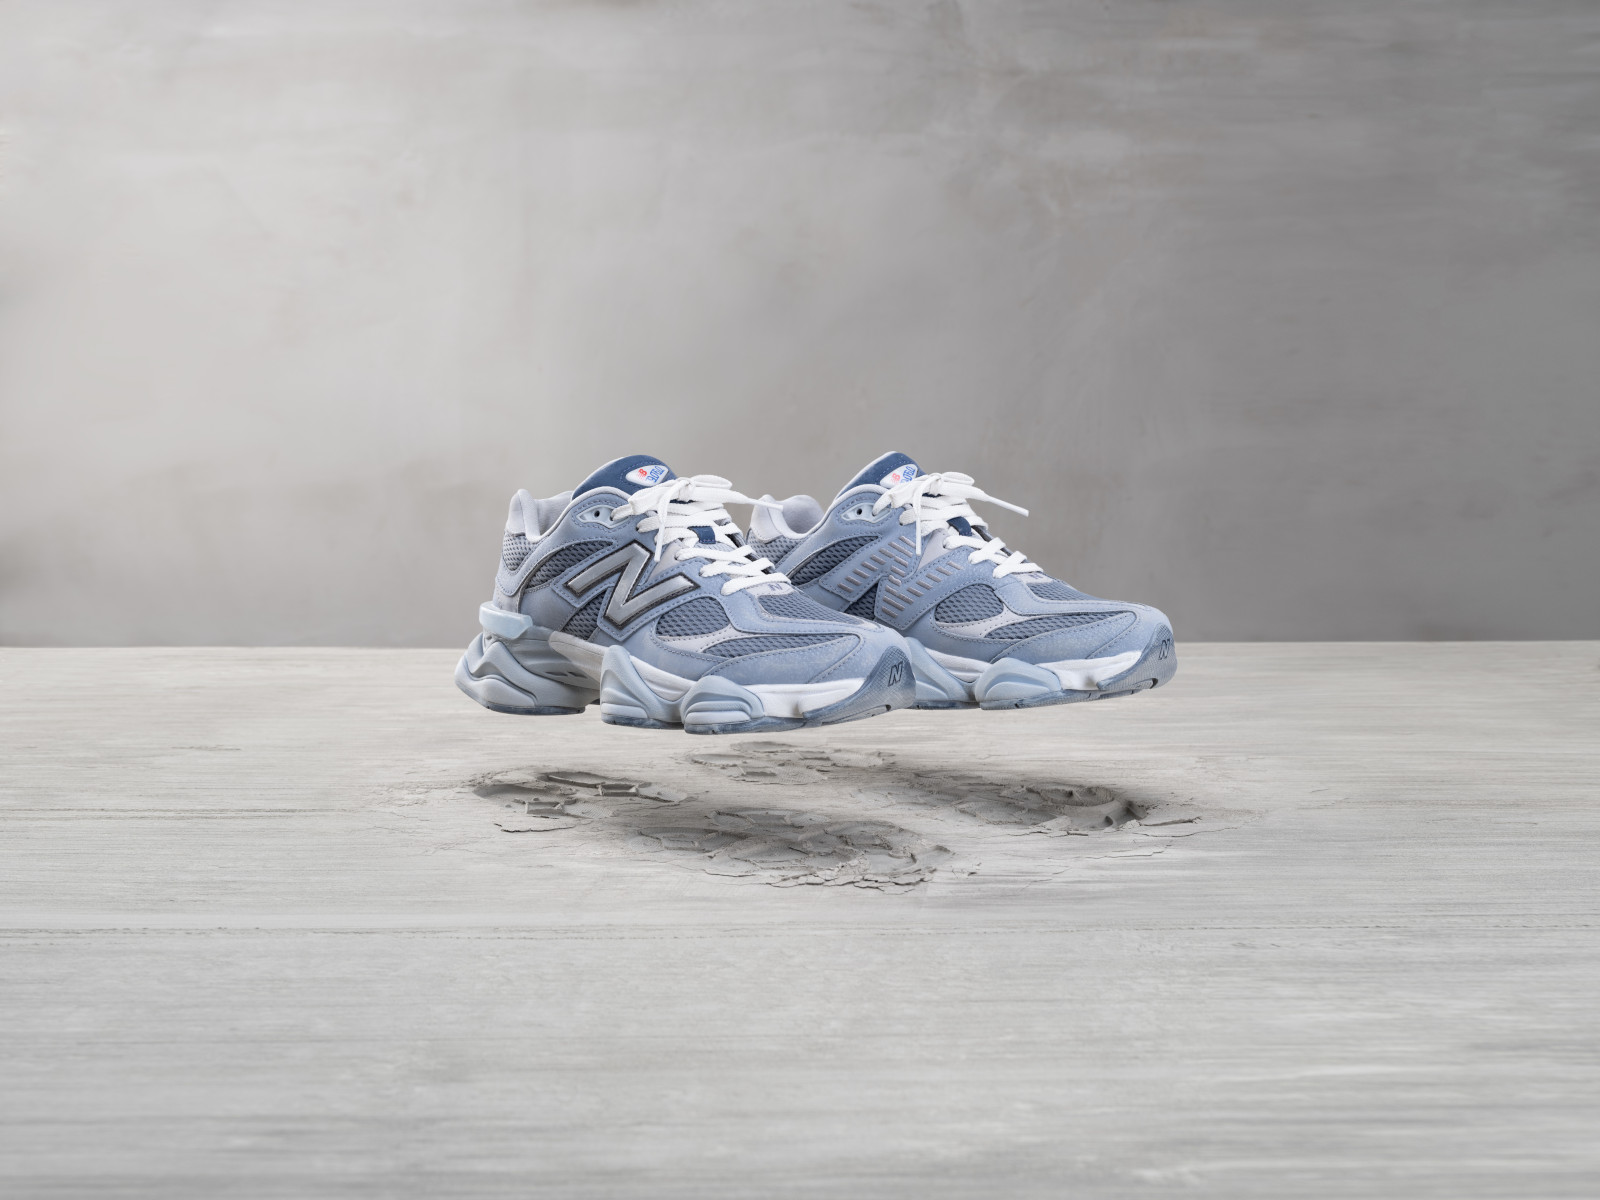 Celebrate Grey Day! New Balance launches Moon Daze, a collection of shoes  that are processed to look as if they have actually walked on the surface  of the moon.